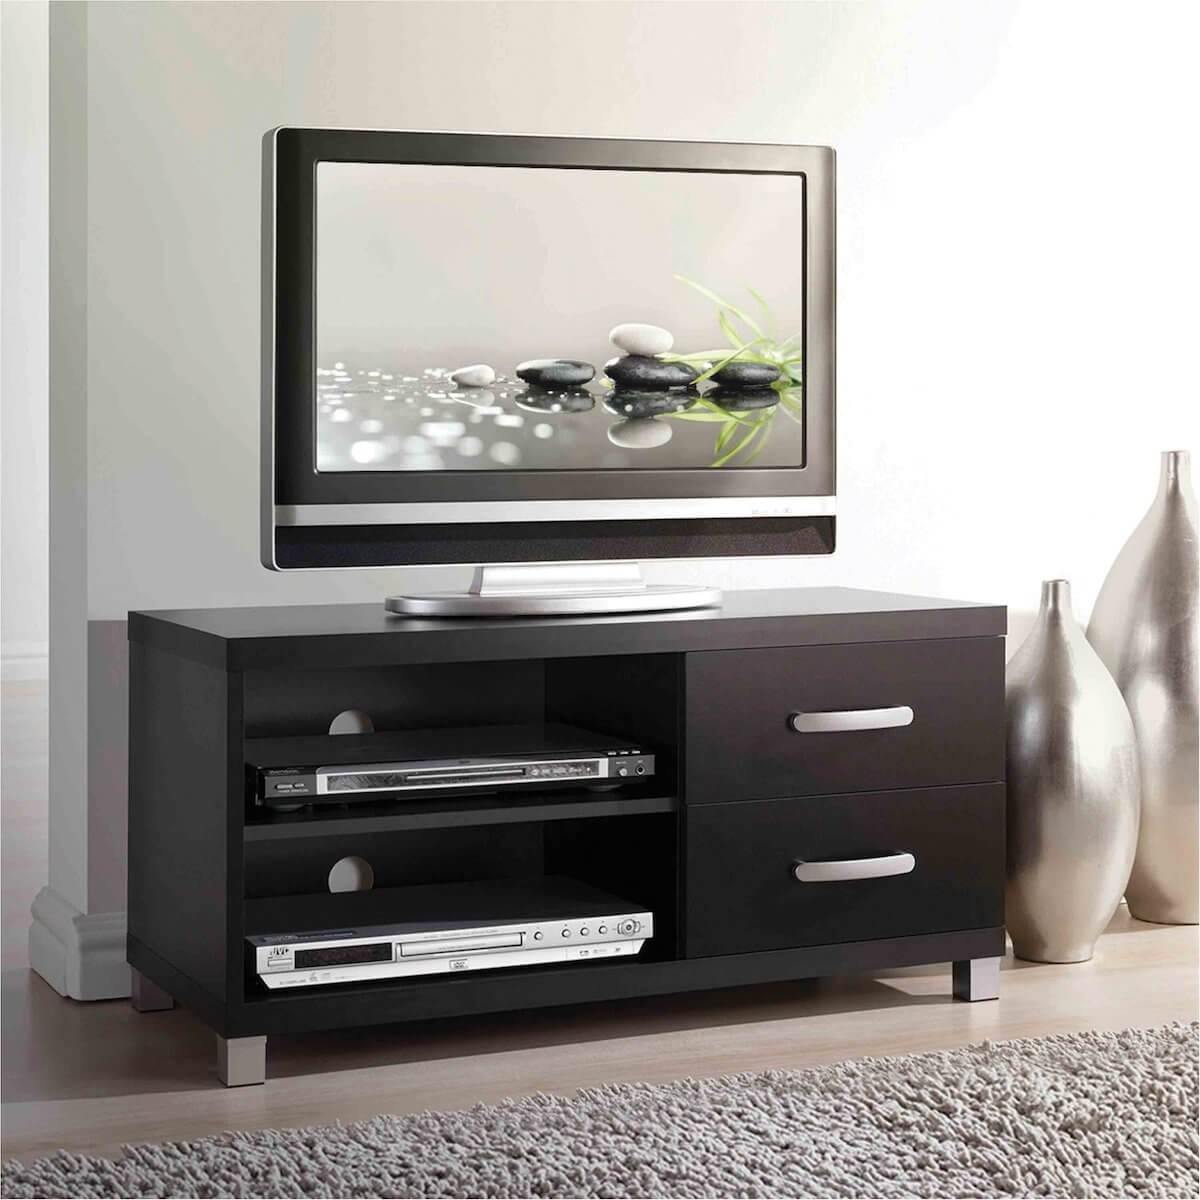 Techni Mobili Black Modern TV Stand with Storage for TVs Up To 40" RTA-8896-BK in Room